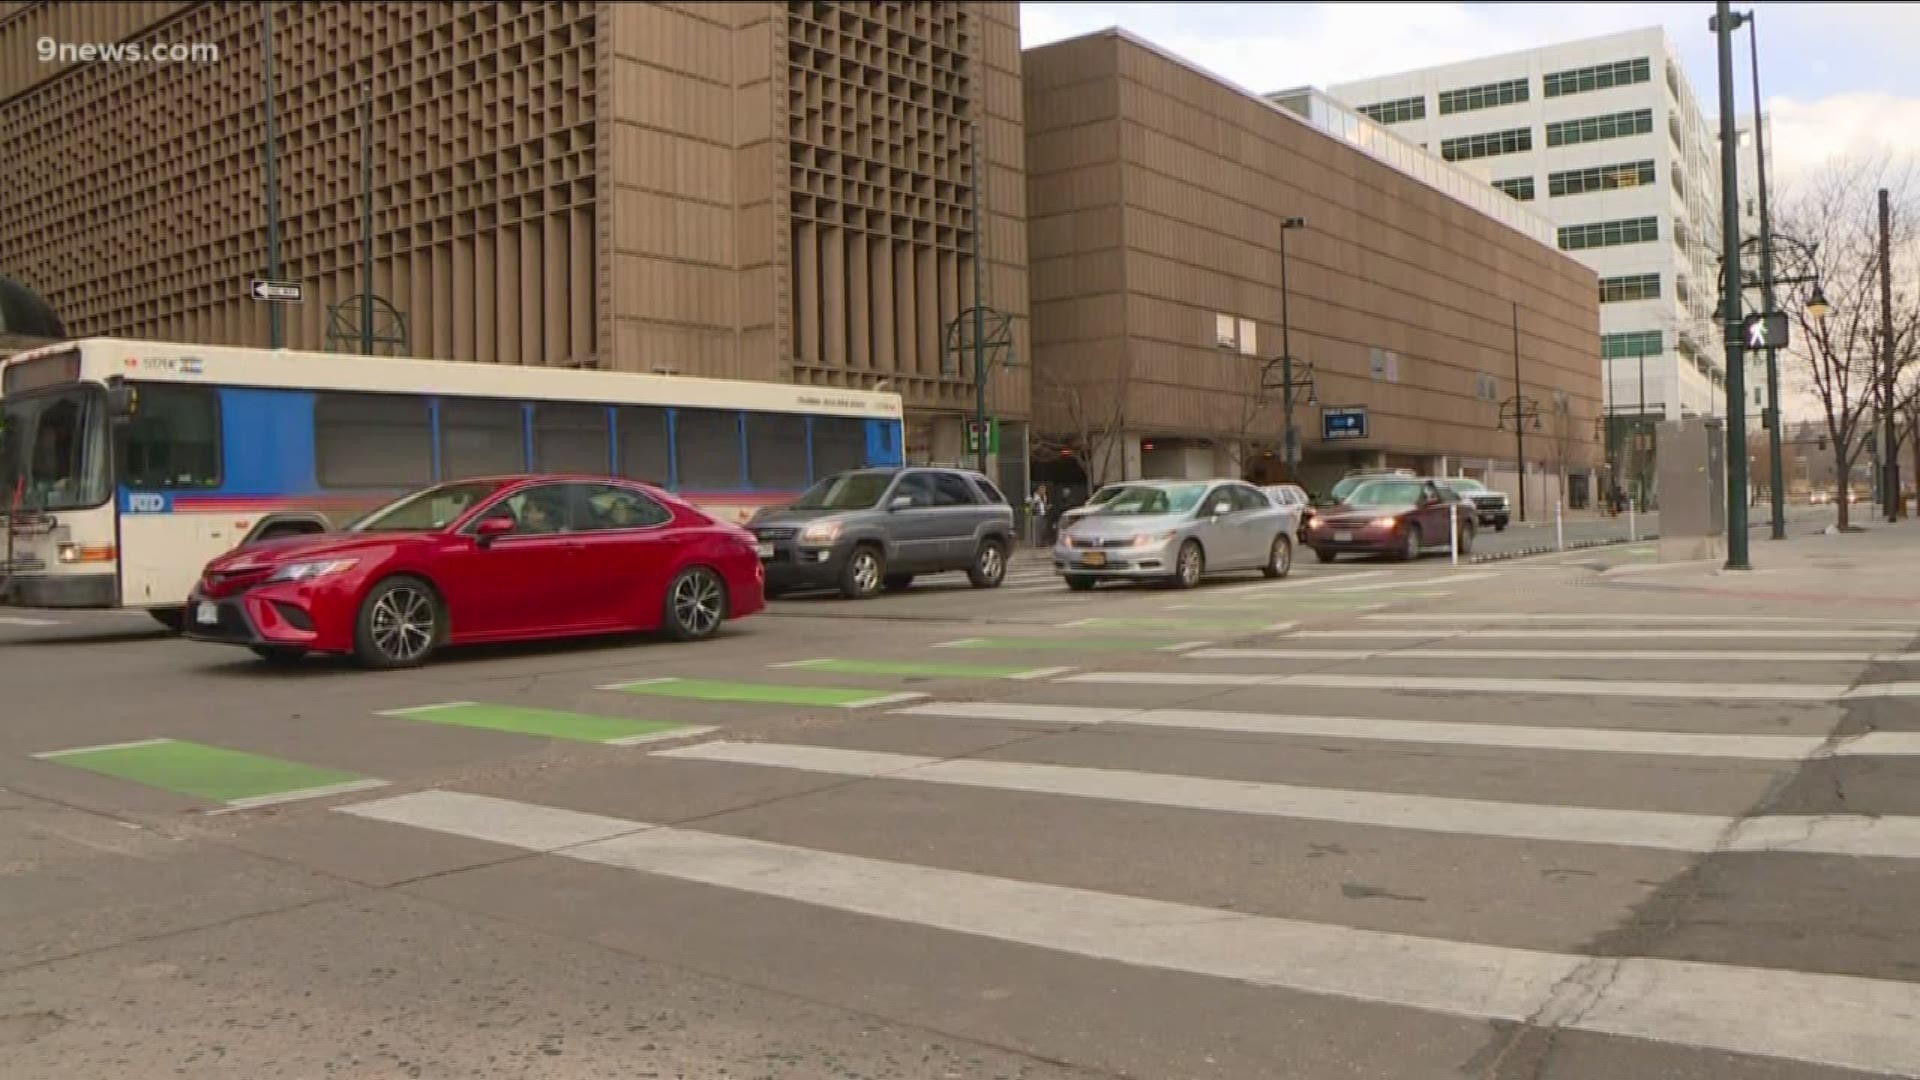 The timing changes are designed to improve how people travel through the city's central business district.